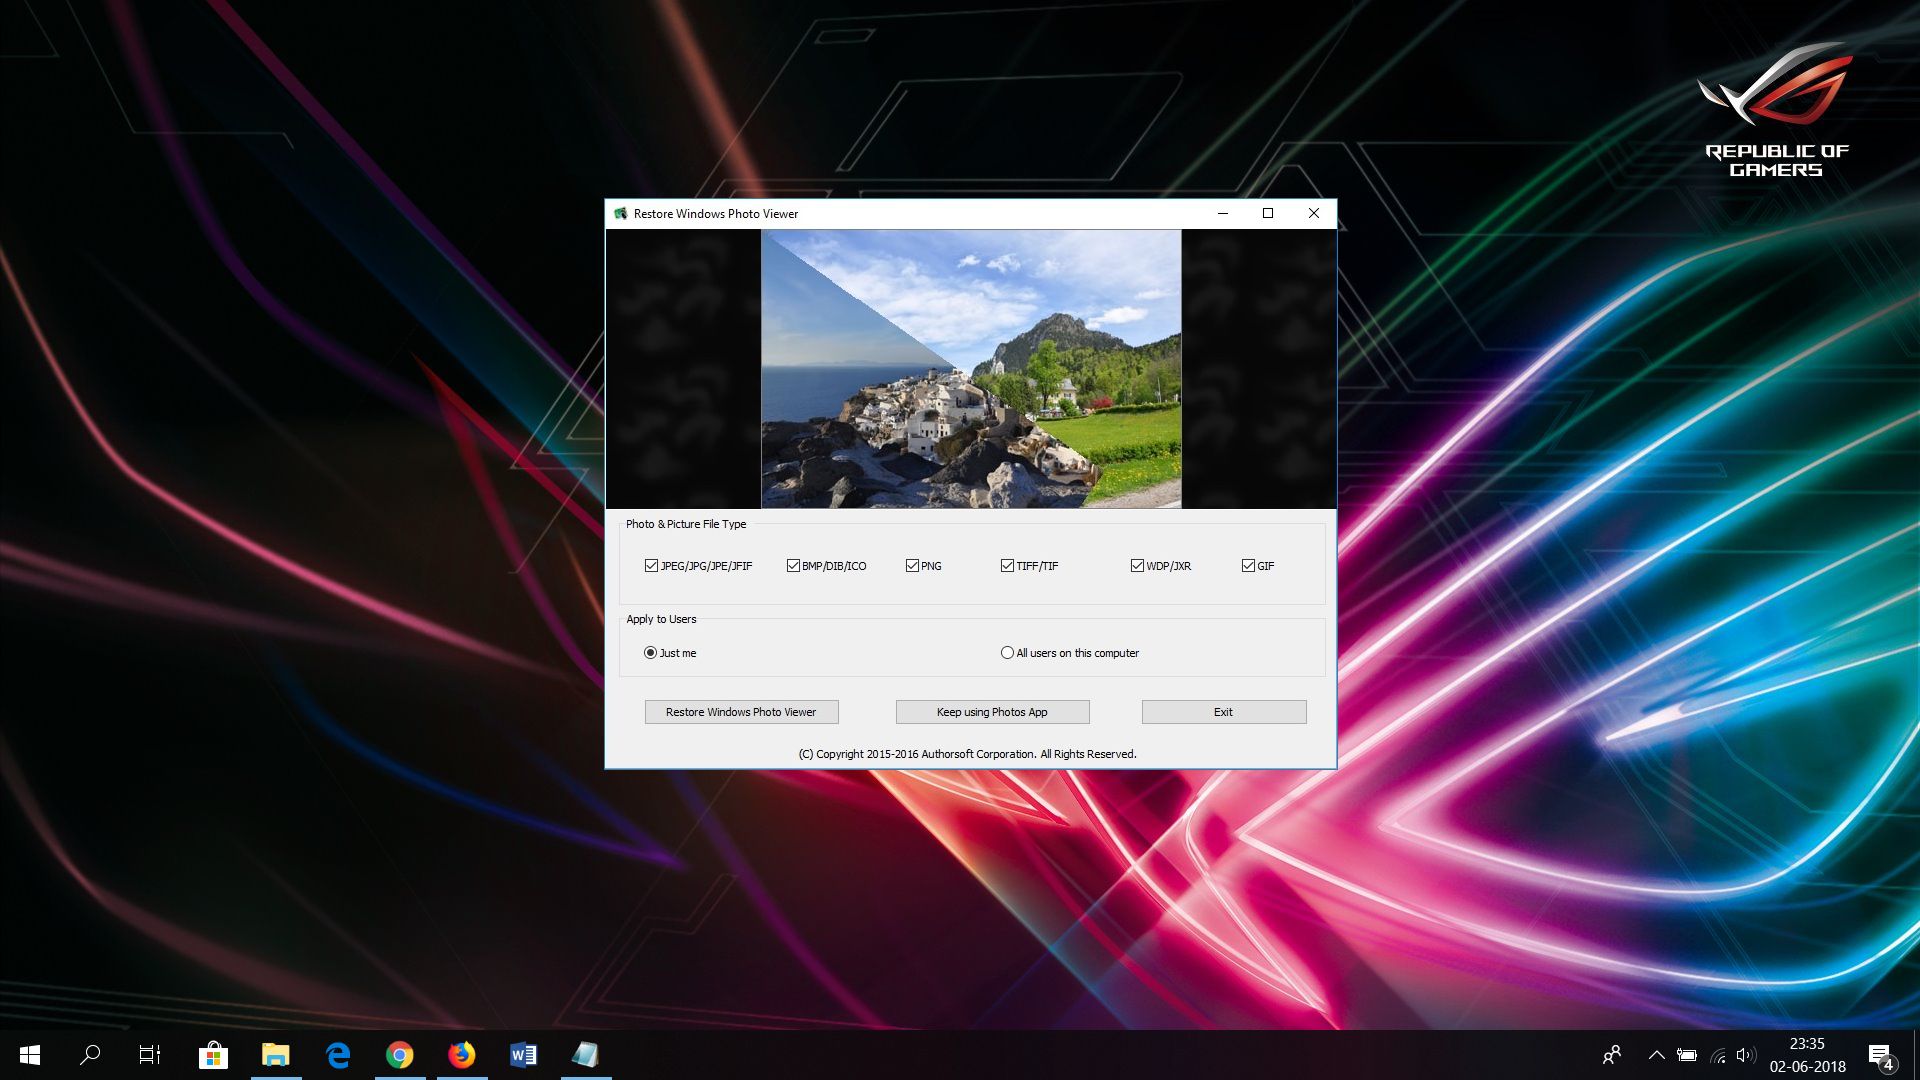 How To Restore Windows Photo Viewer In Windows 10 Easy Solution 100